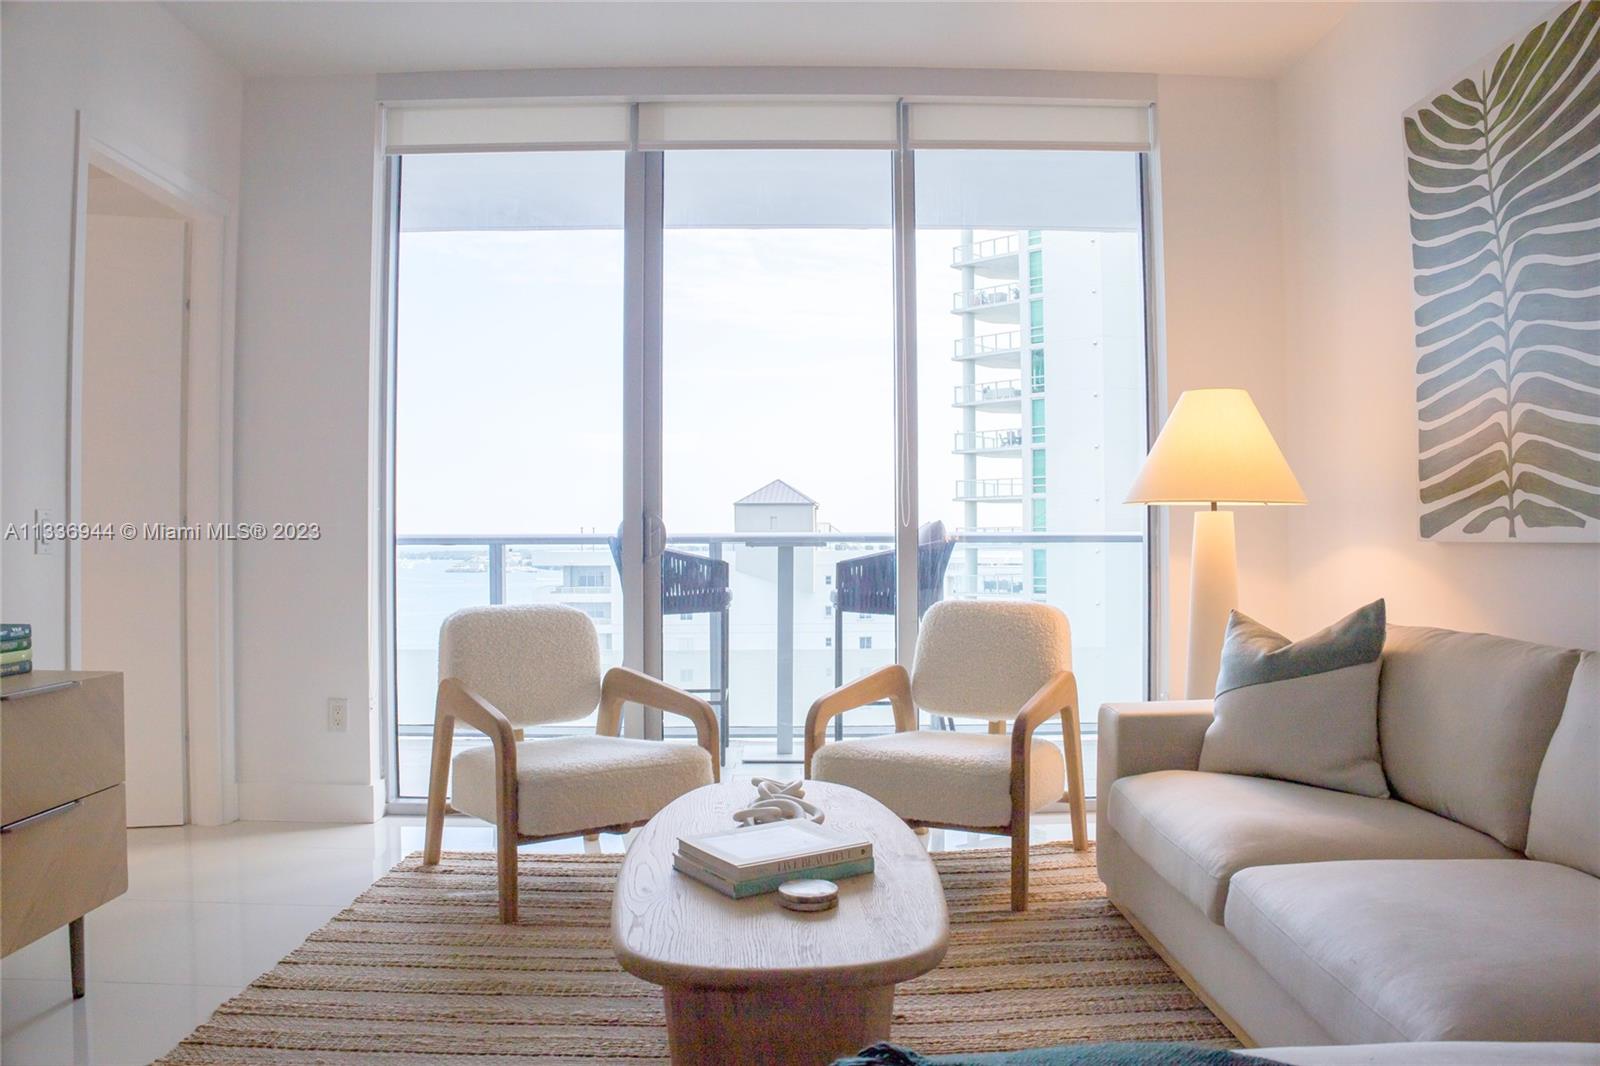 Best line in the building with stunning water views! This luxury apartment is Brickell living at its finest. First of all, you’re in the center of Miami where trendy cocktail bars sit alongside pop-up restaurants and World class shops. The glass highrises that line the streets feel like the Miami from the big screen, and icons such as Palm Trees, Bay Views and Miami beach's Art Deco District are just minutes away. To see more of the city, hop on the free light rail to loop the glowing skyline at night.

This is a fully furnished rental that includes all utilities and internet. We have a 1 month minimum rental term.